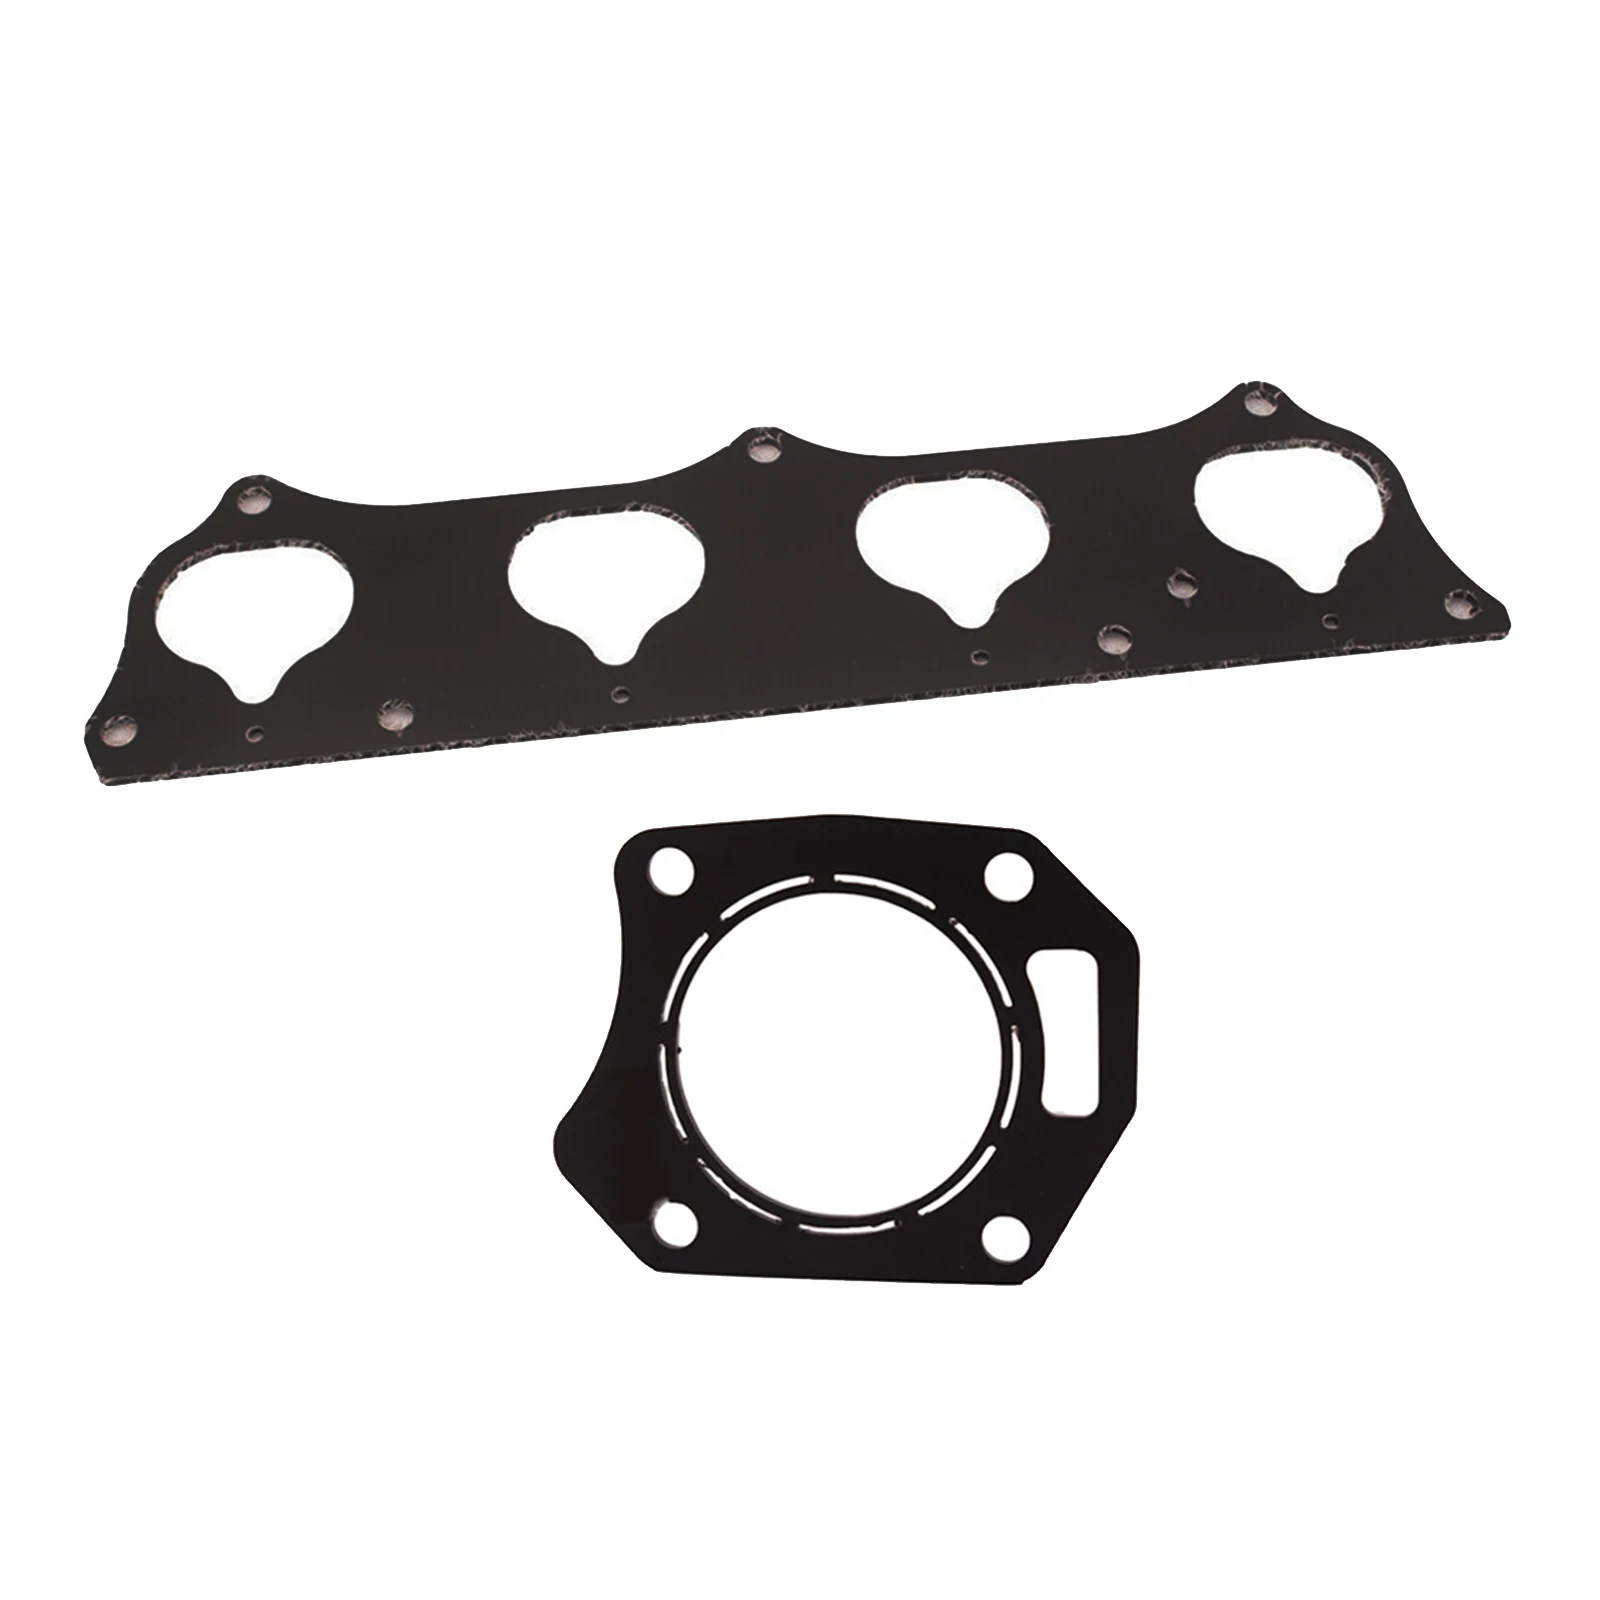 Intake  Gasket Thermal Throttle Body Gasket  Civic Hatchback 02  Made of high reliable quality and durable material